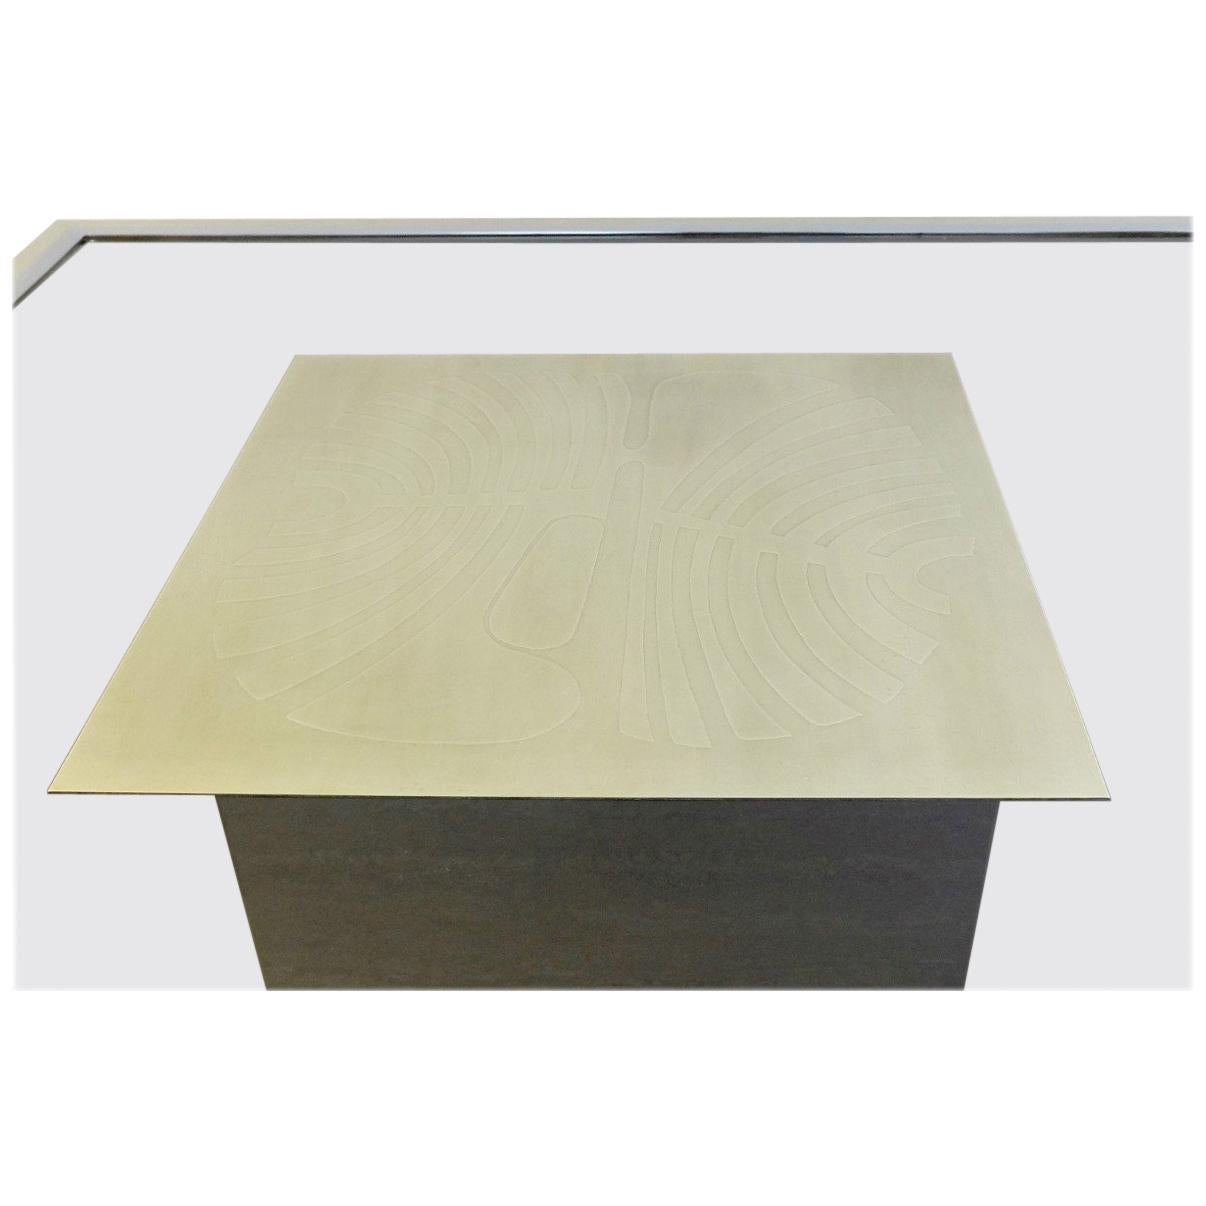 Table in Smoked Glass, Travertine, Chrome and Brass Top by Roger Vanhevel